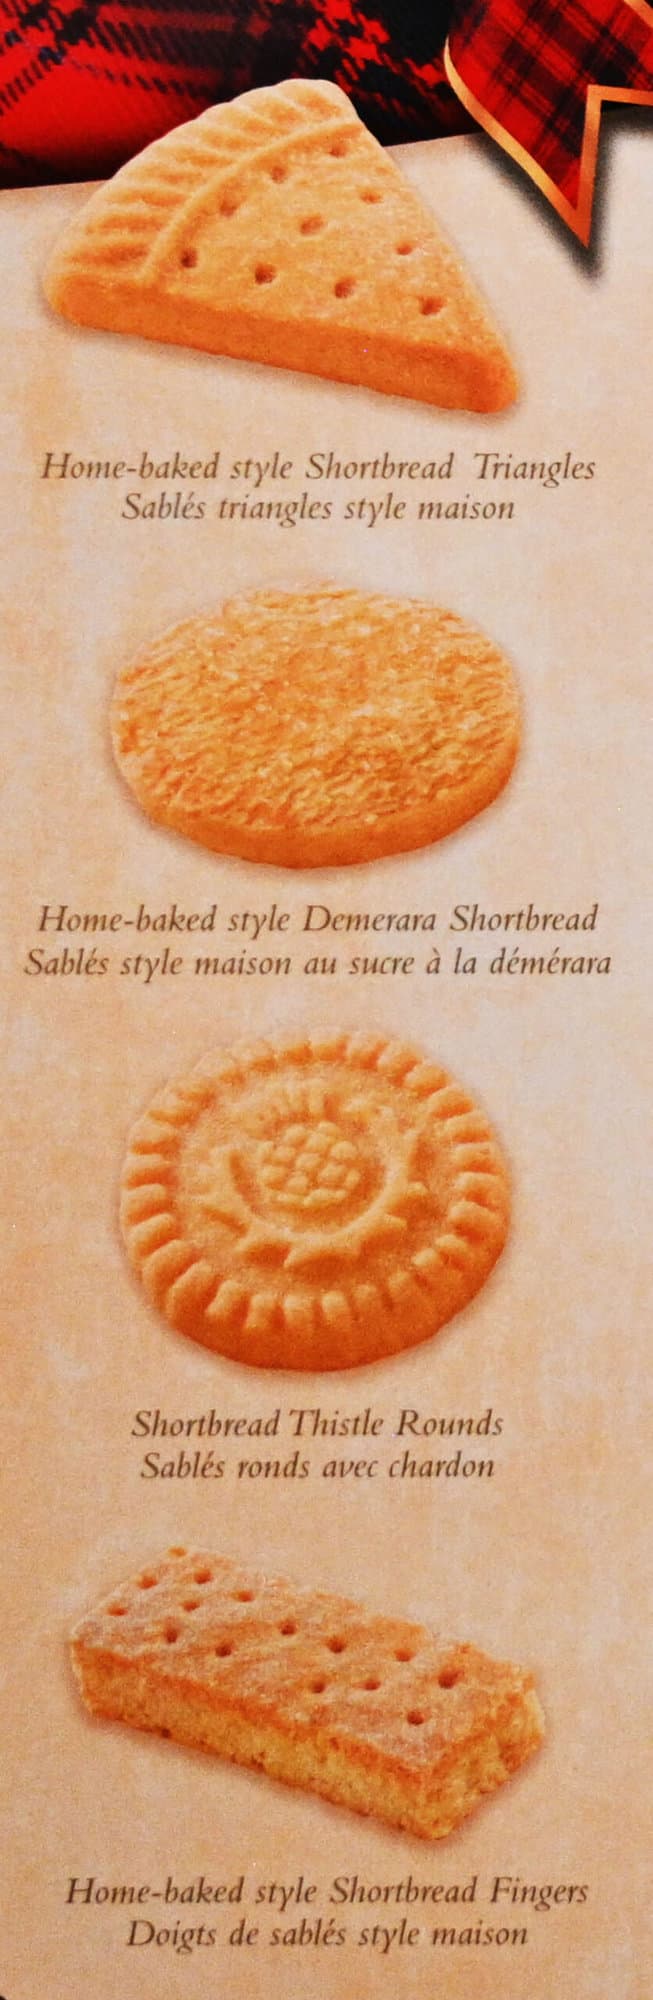 Image of the guide from the tin showing the title of each shape of shortbread, four different kinds.